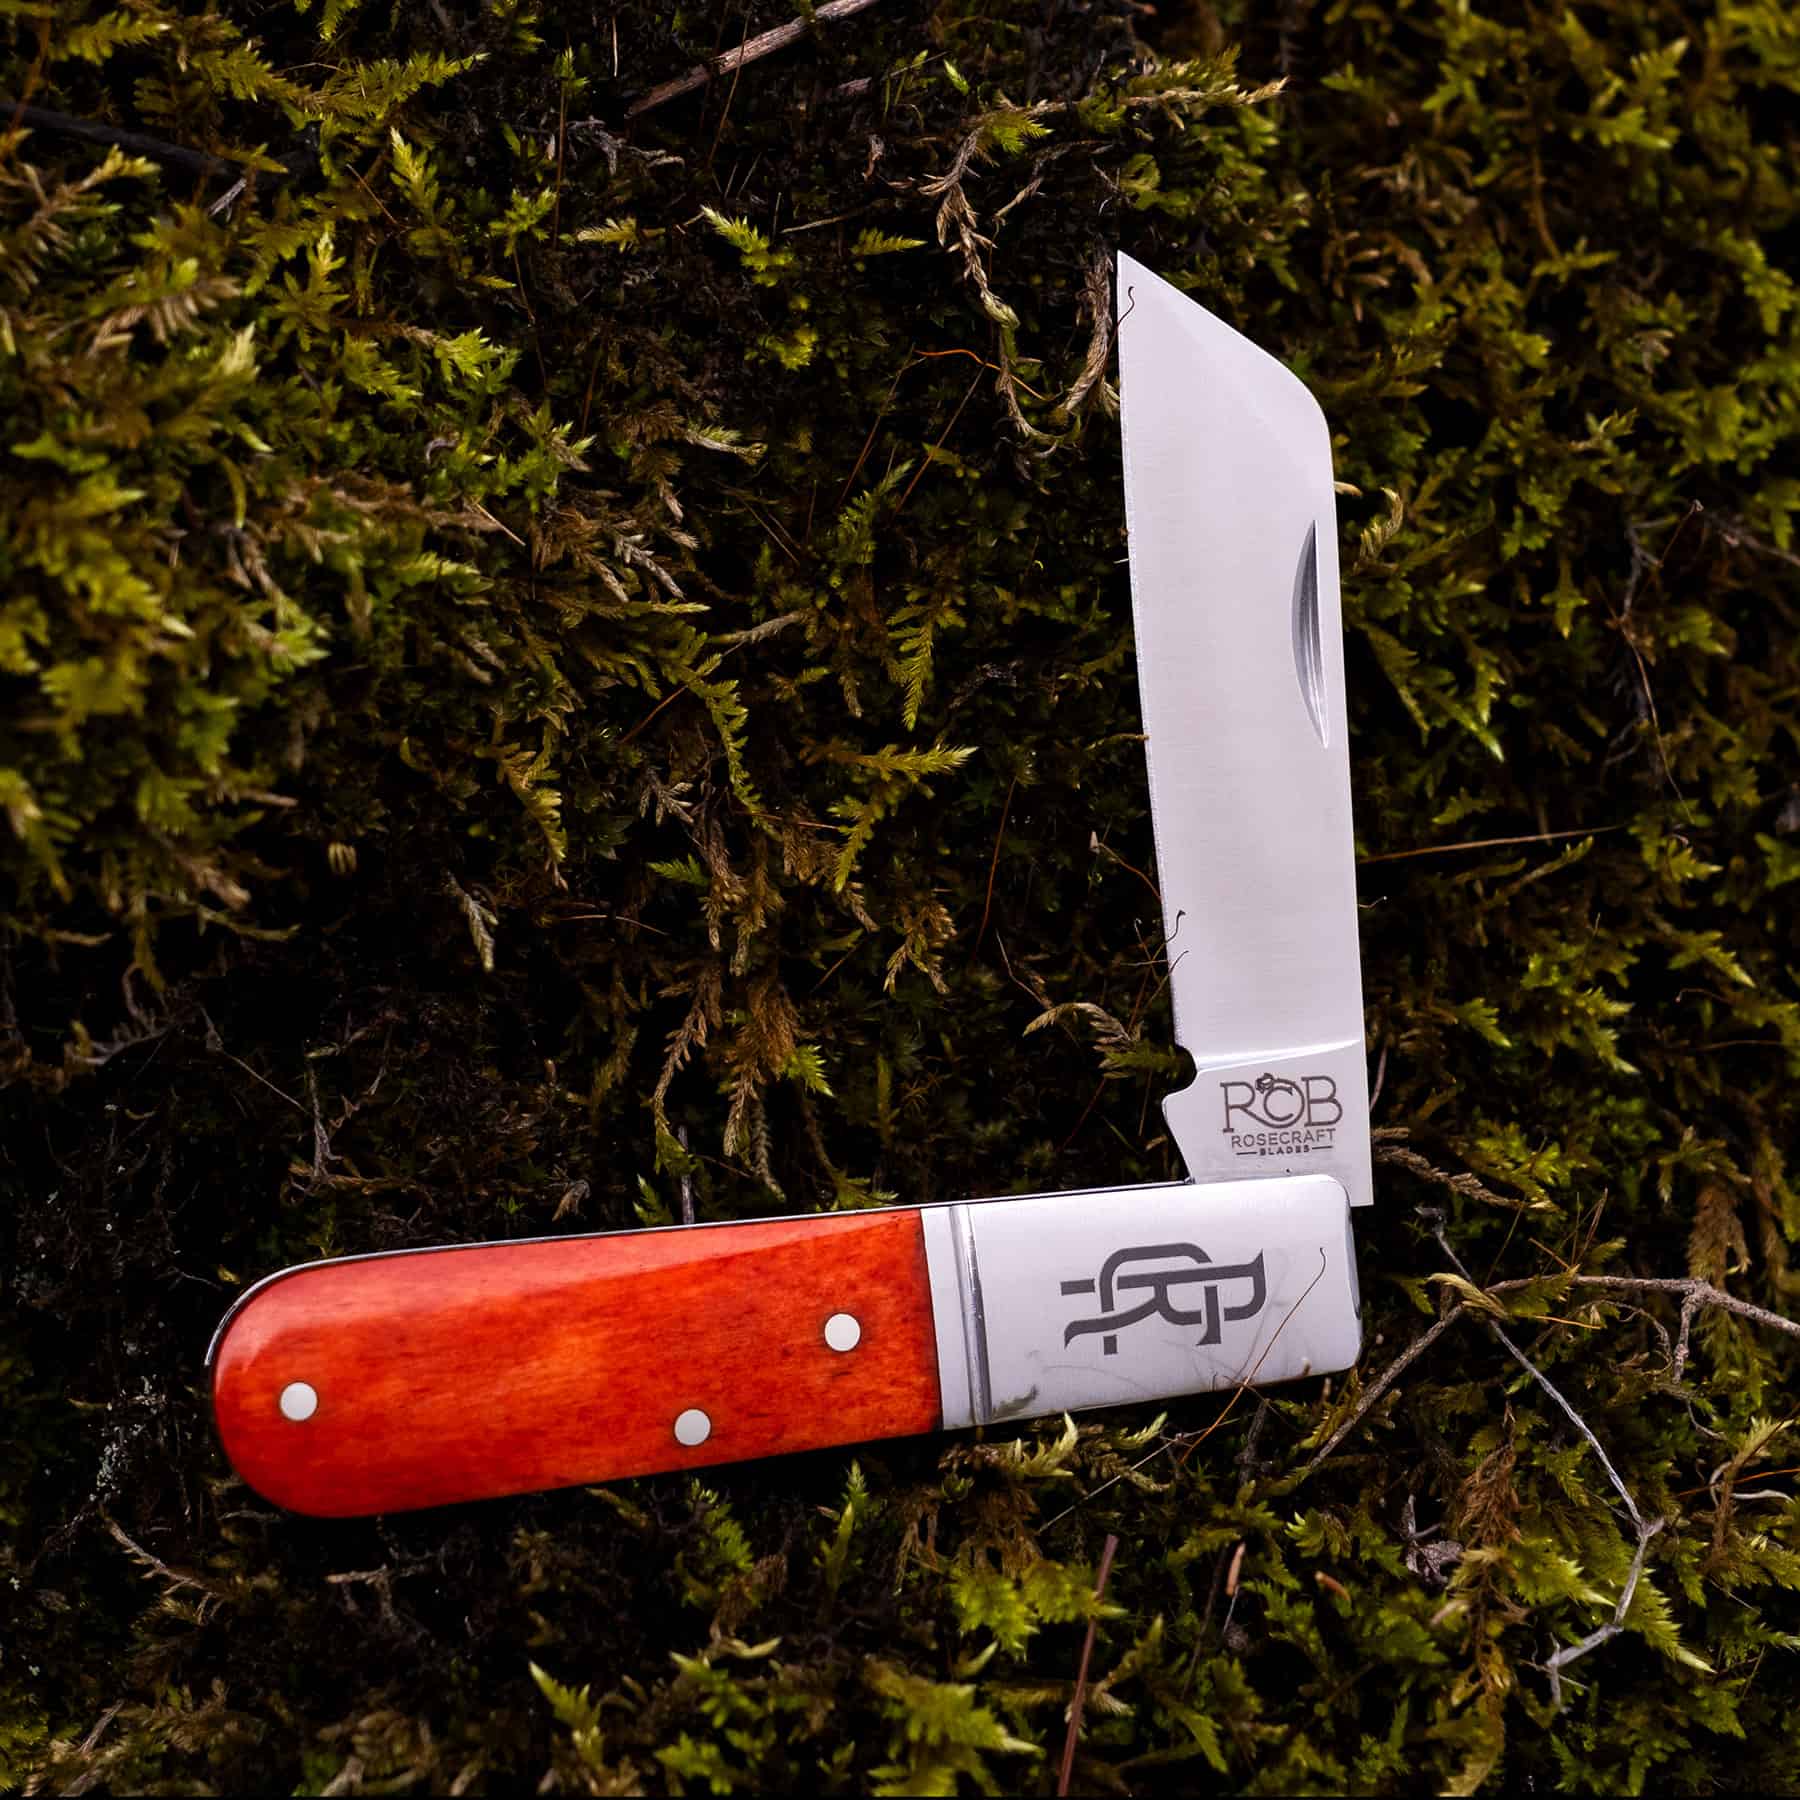 We spent a few weeks testing out the RoseCraft Beaver Creek Barlow slip joint knife for our in-depth review.